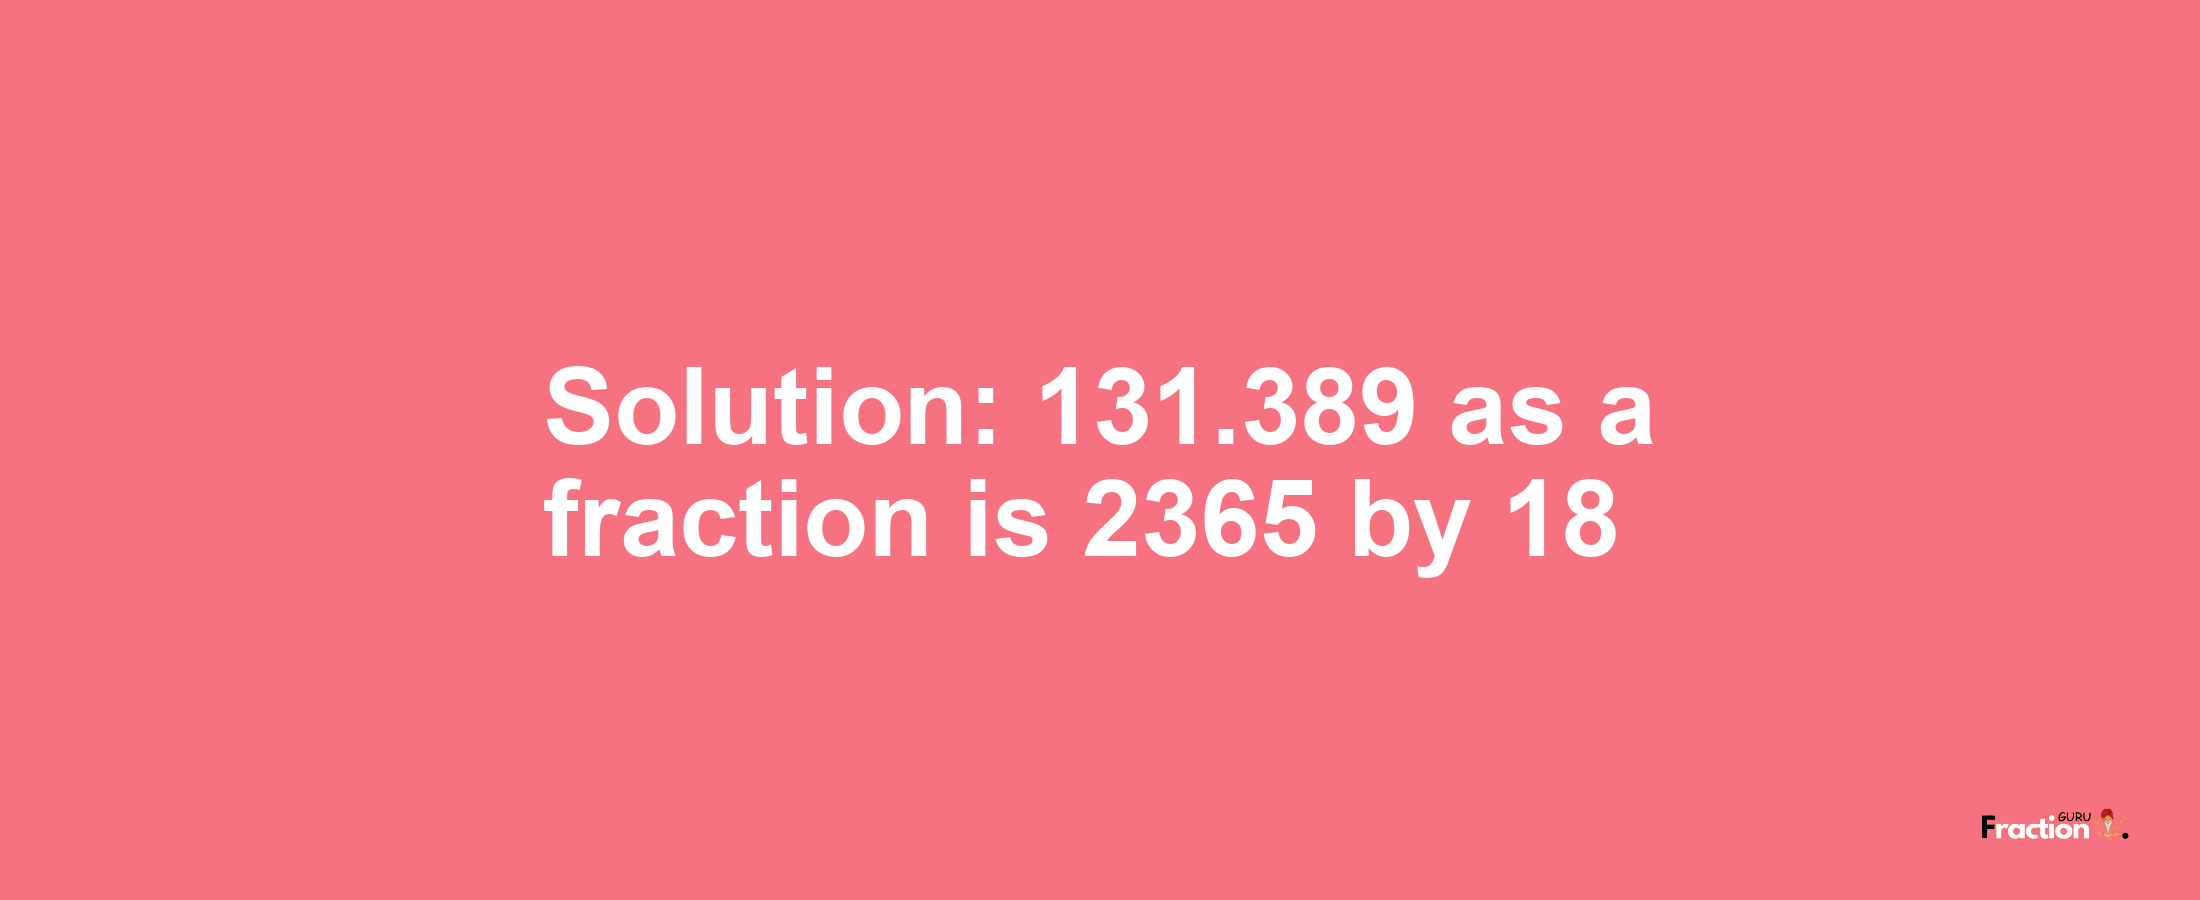 Solution:131.389 as a fraction is 2365/18